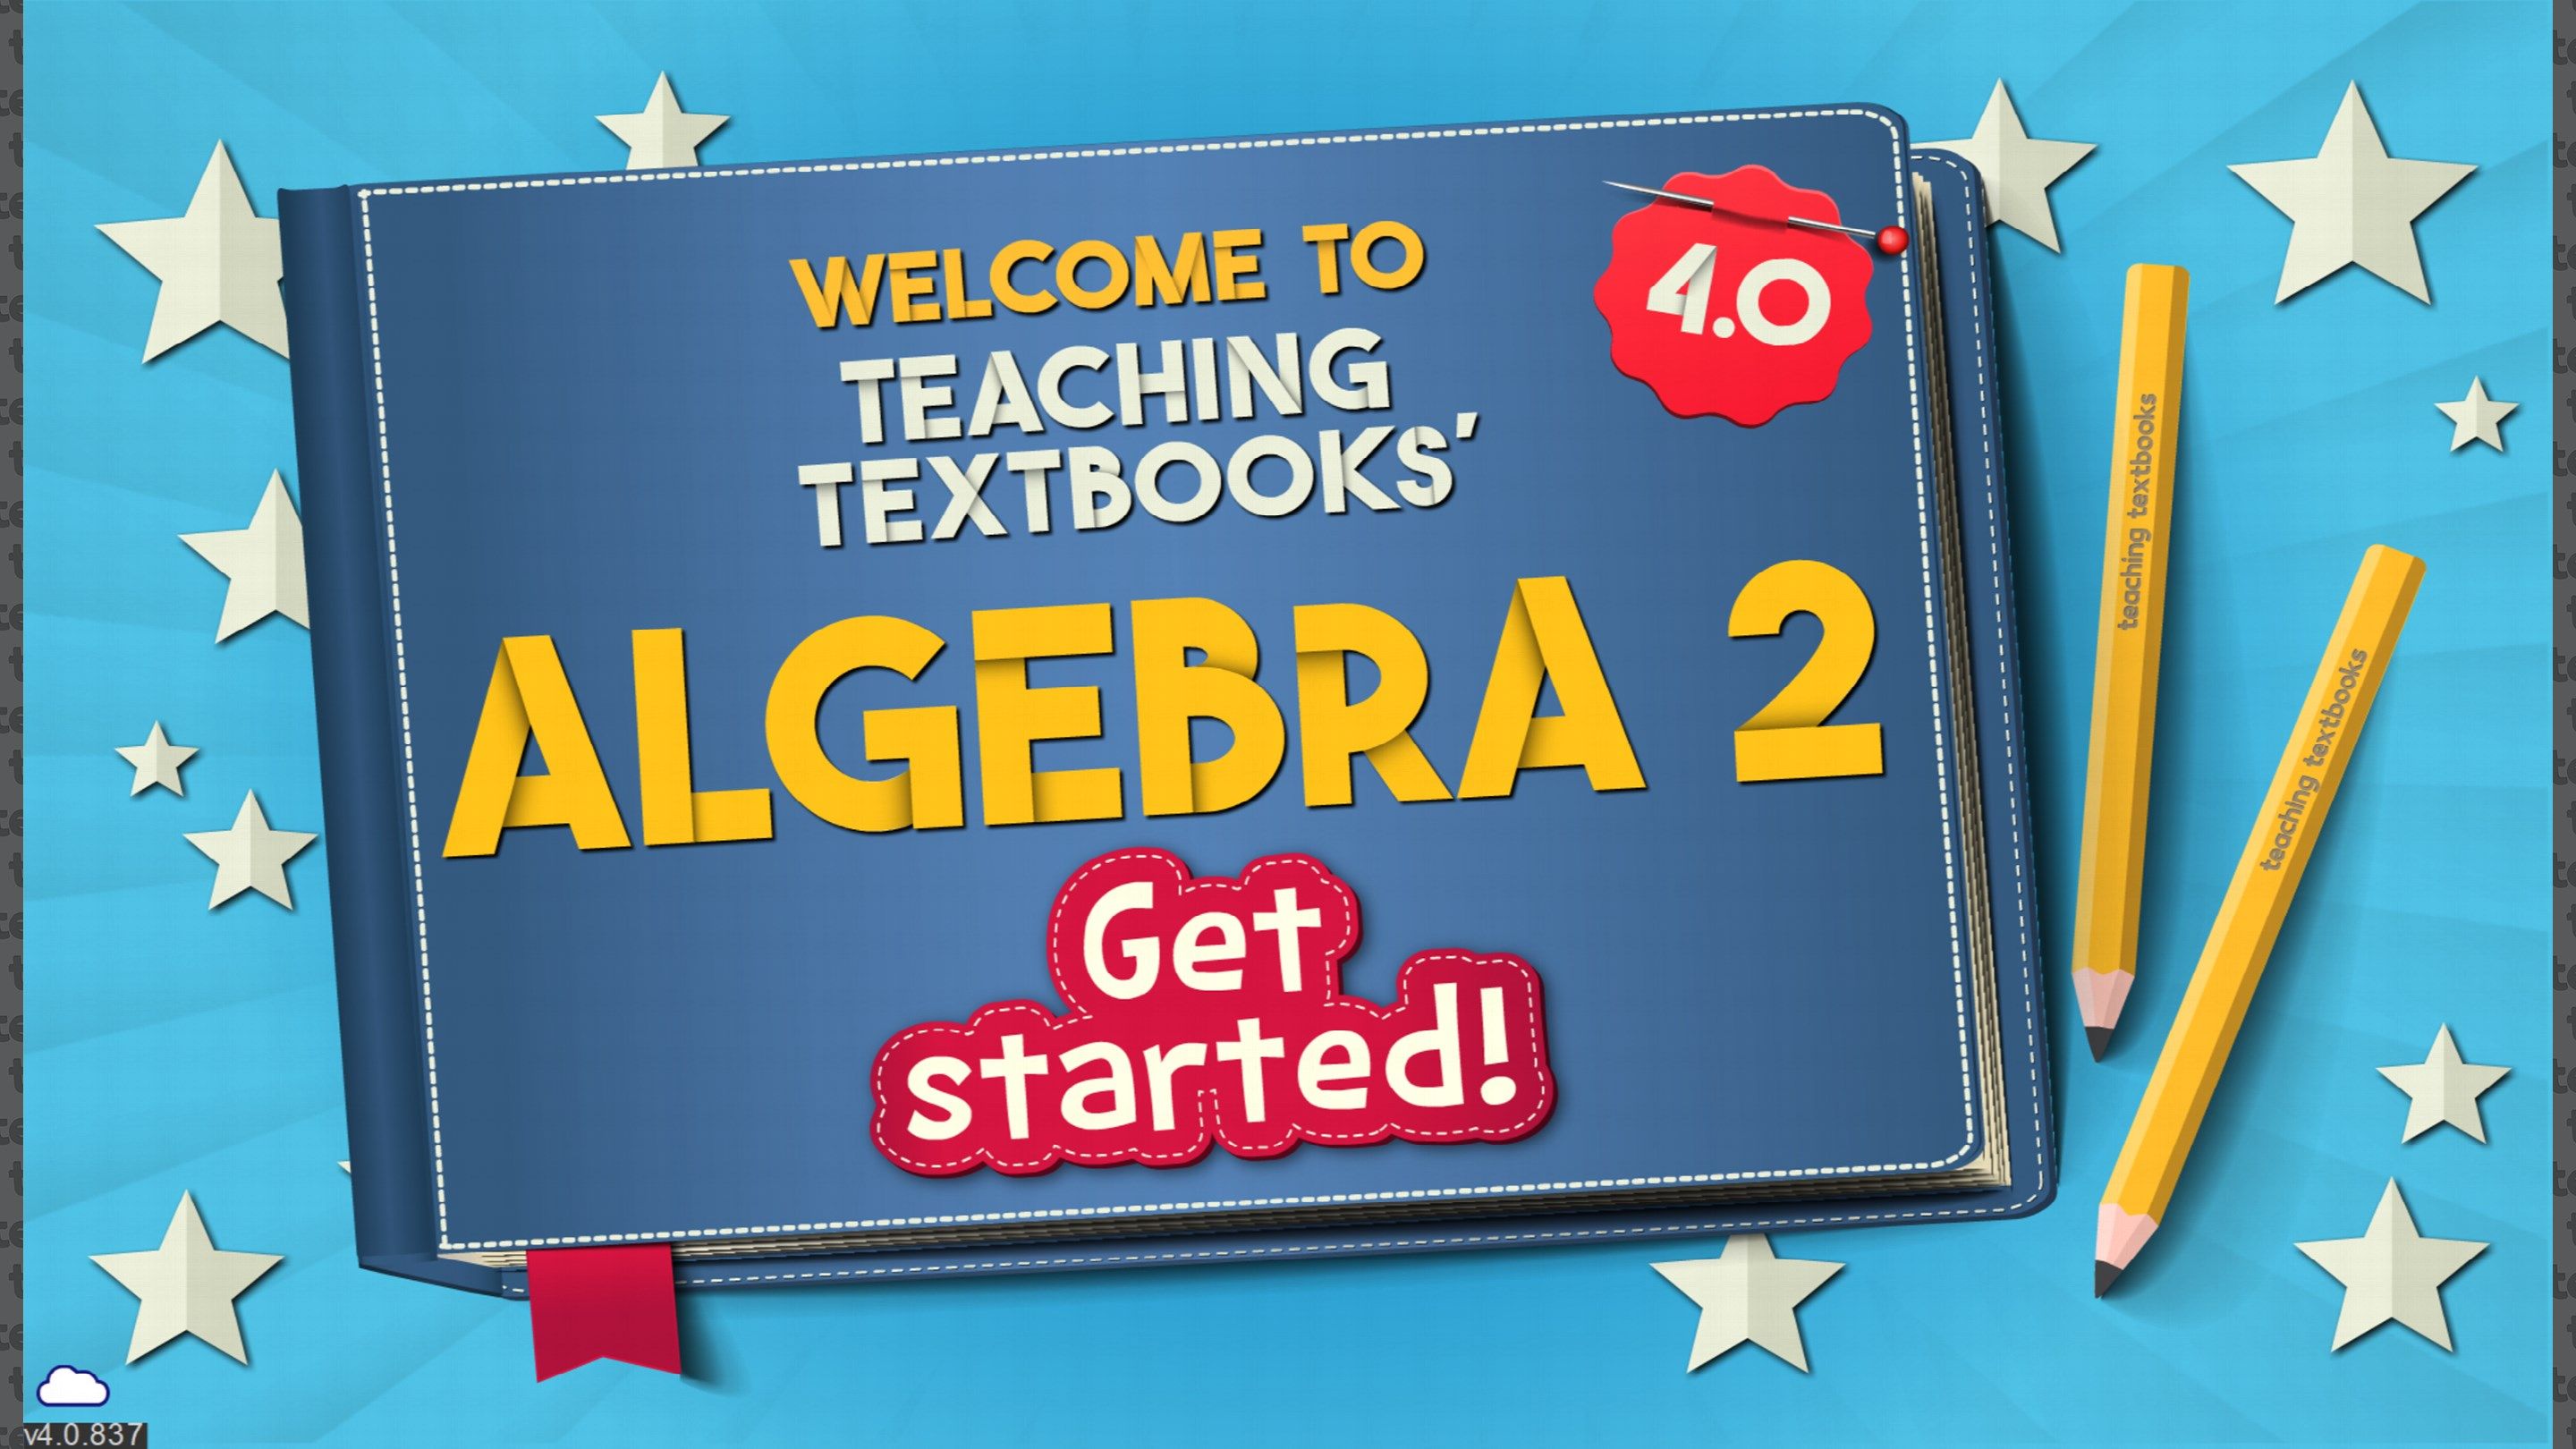 When the app launches, all you have to do to get started is log in with your Teaching Textbooks parent account, and it will connect to your Algebra 2 enrollment.